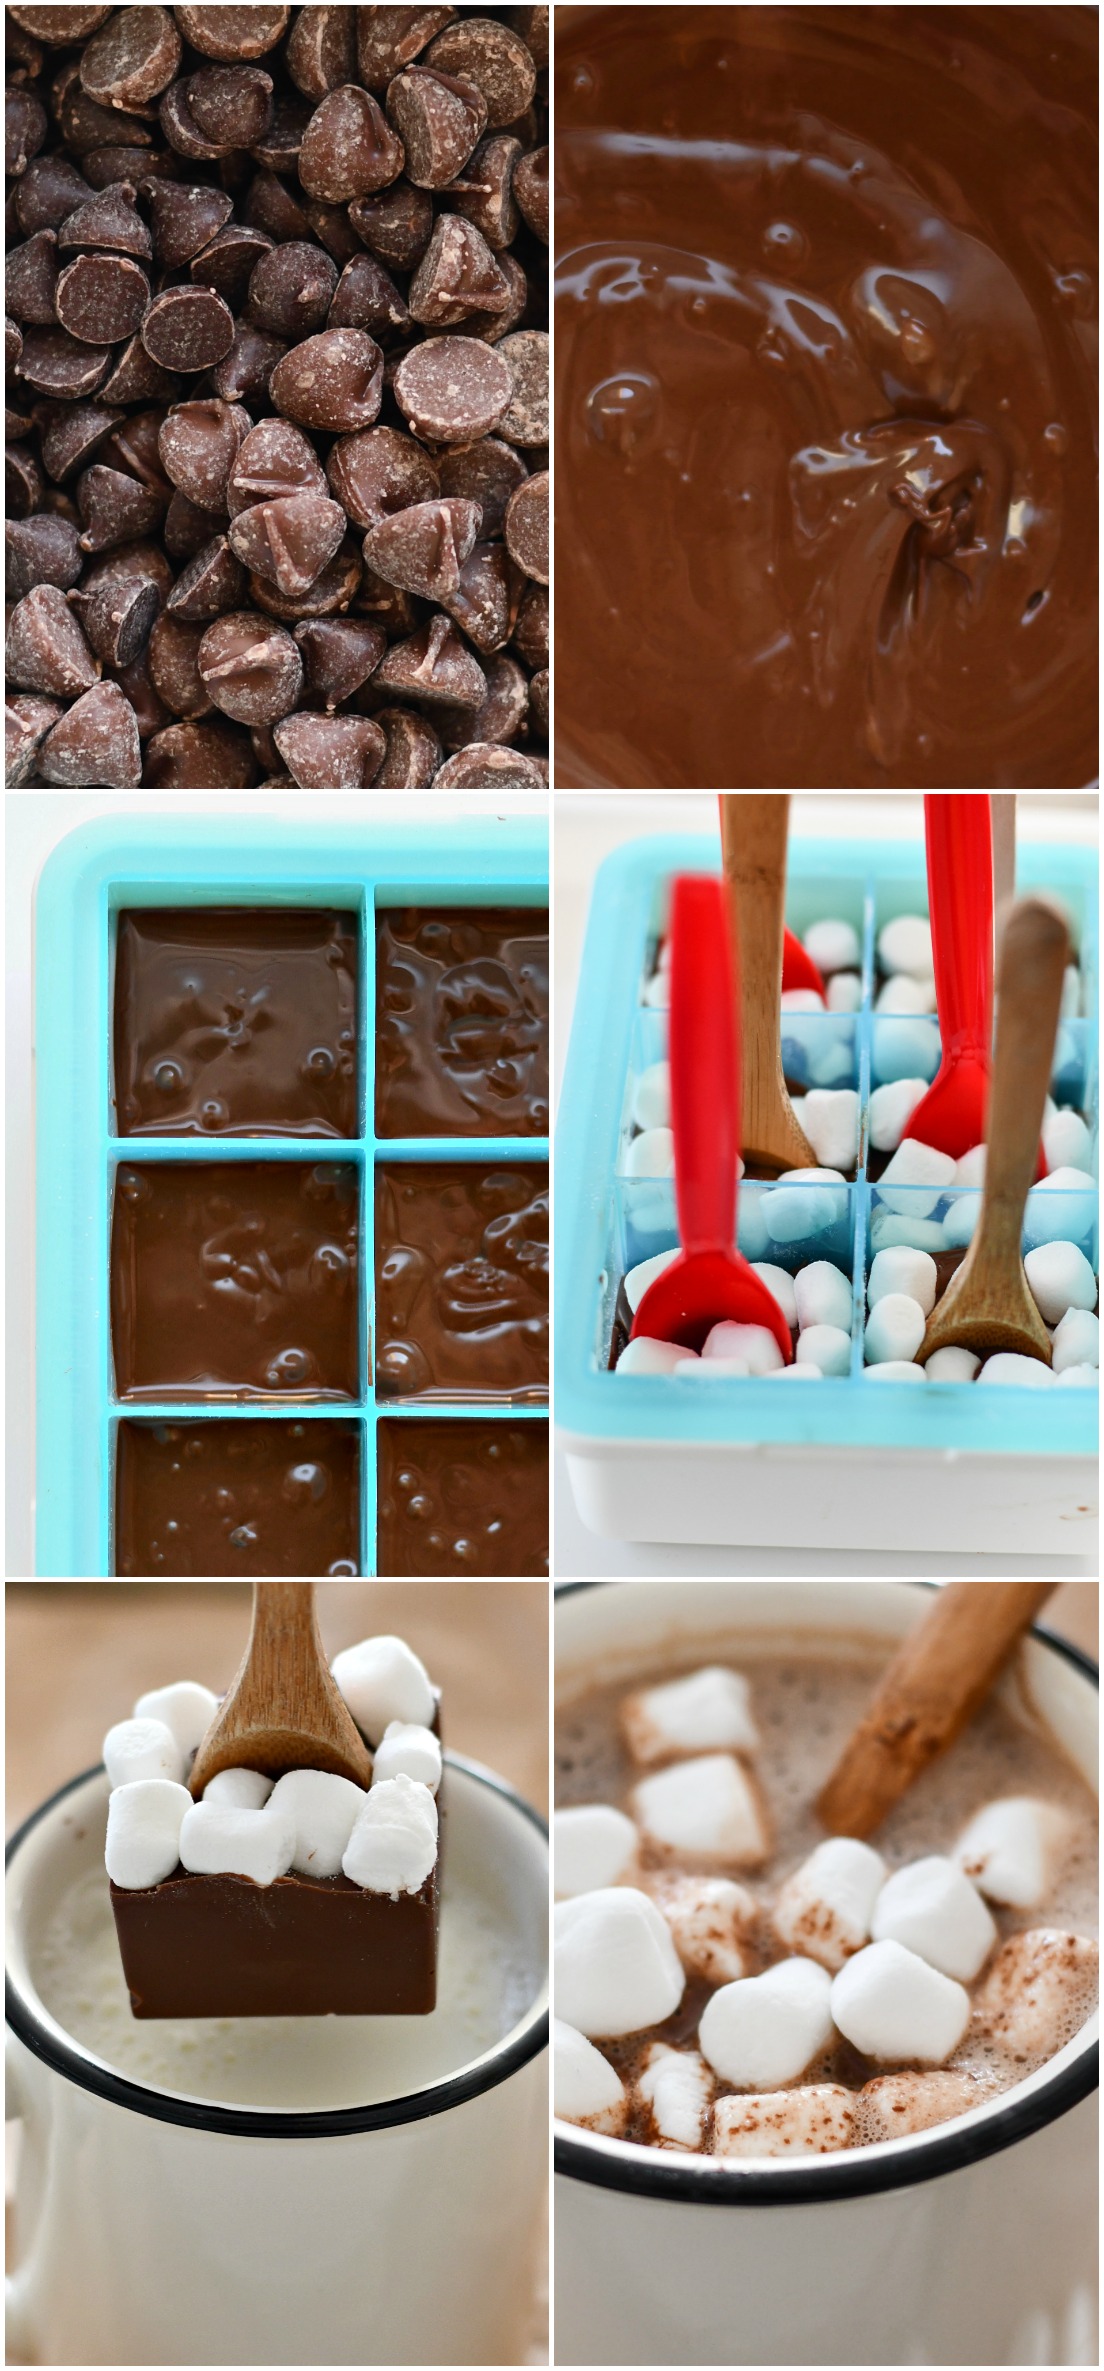 Skip the store bought packets of chocolate powder and make your own Hot Chocolate Spoons from chocolate chips #hotchocolate #hotdrinks